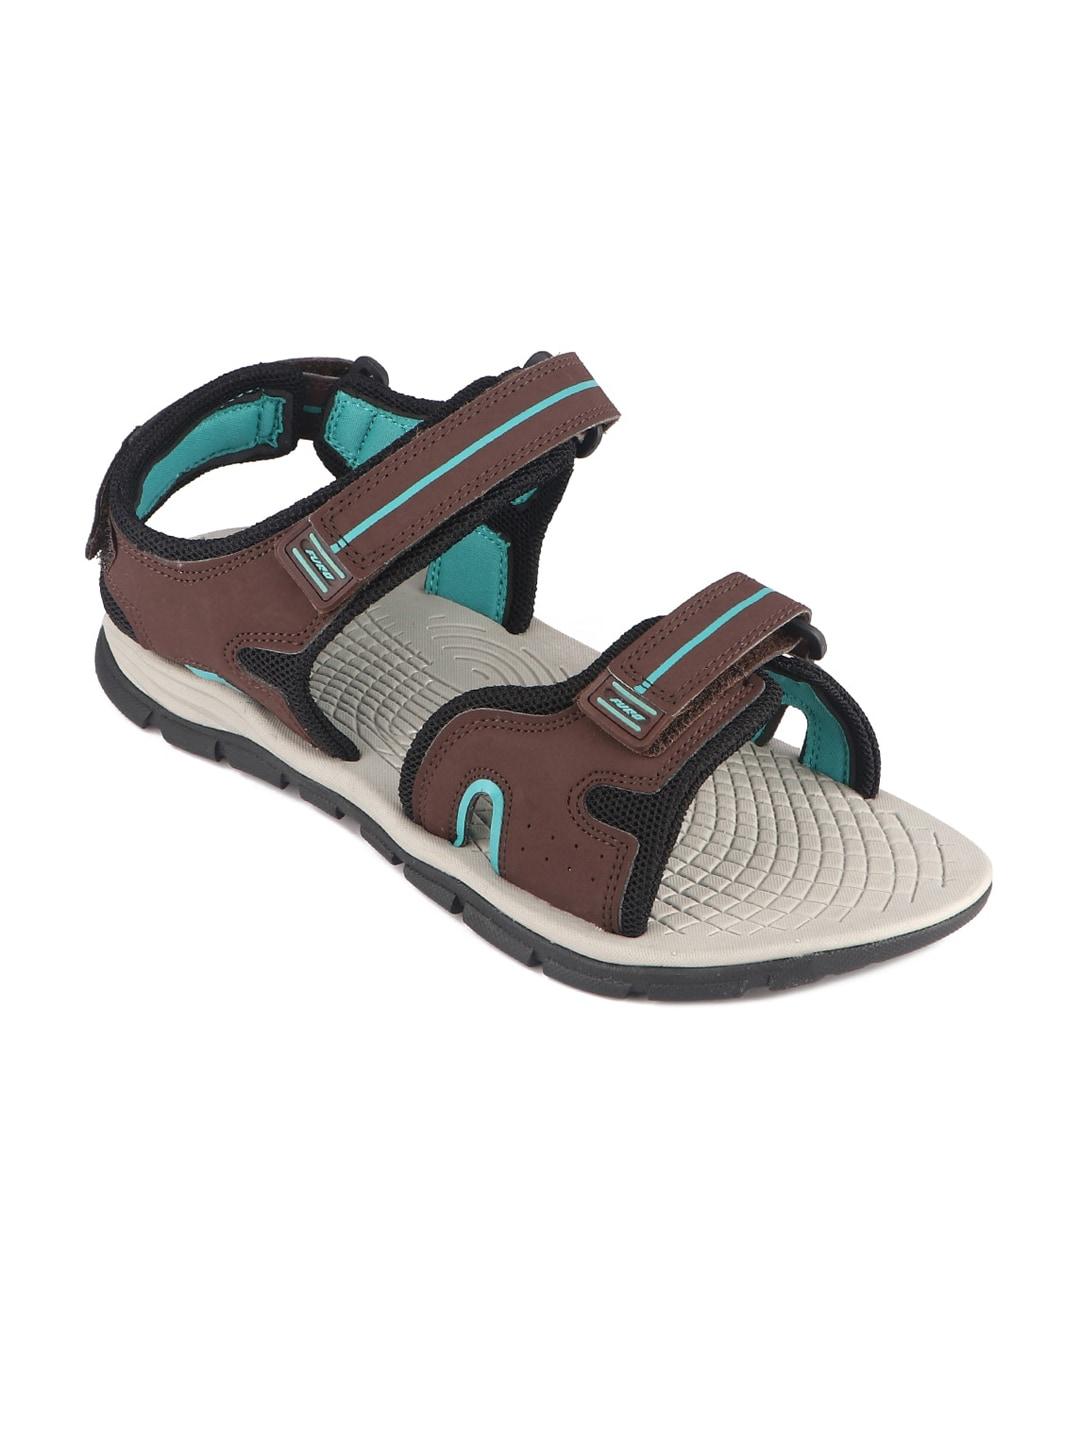 furo-by-red-chief-men-textured-sports-sandals